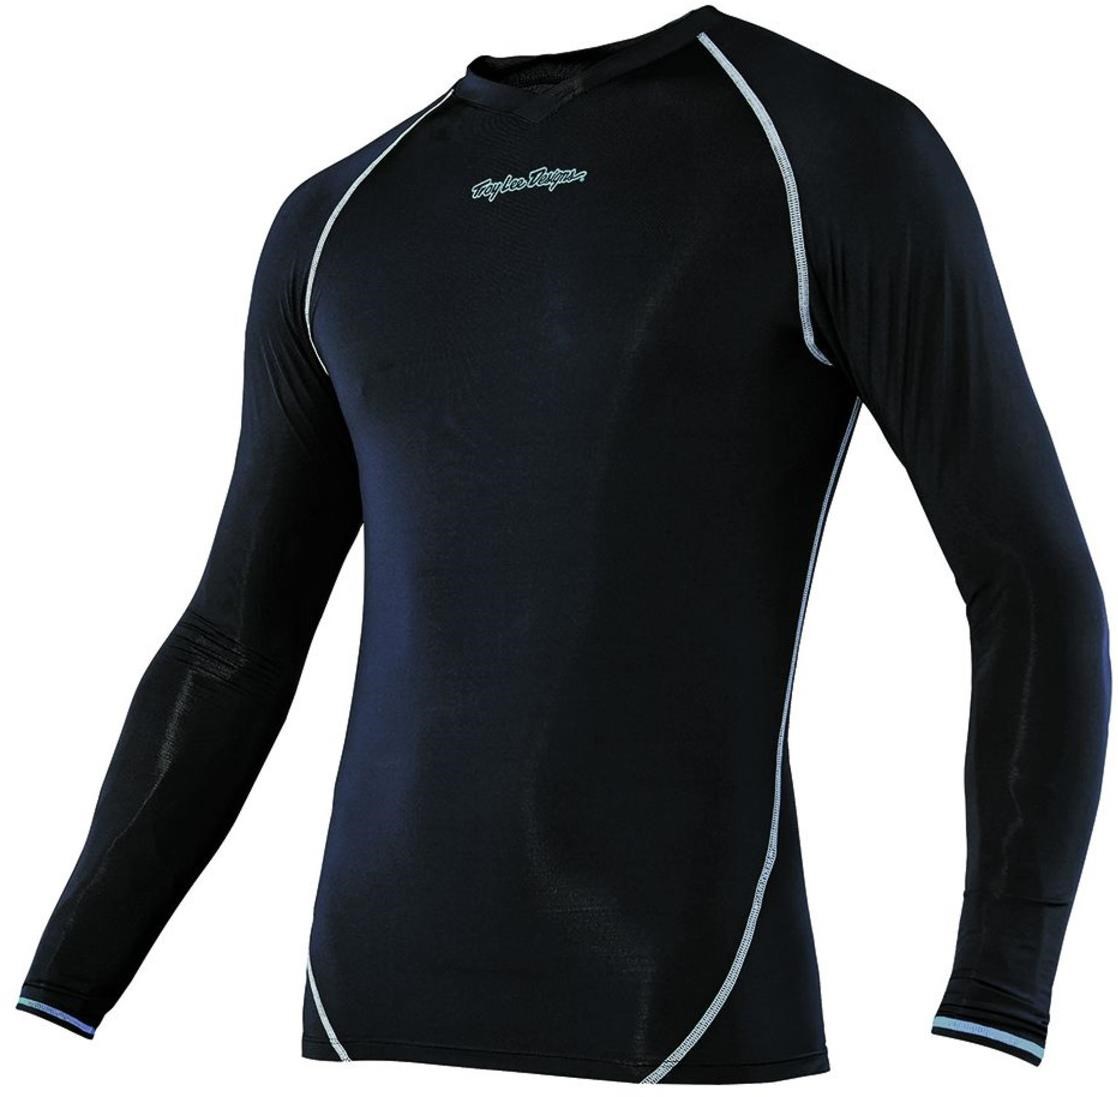 Troy Lee Designs Ace Long Sleeve Cycling Baselayer